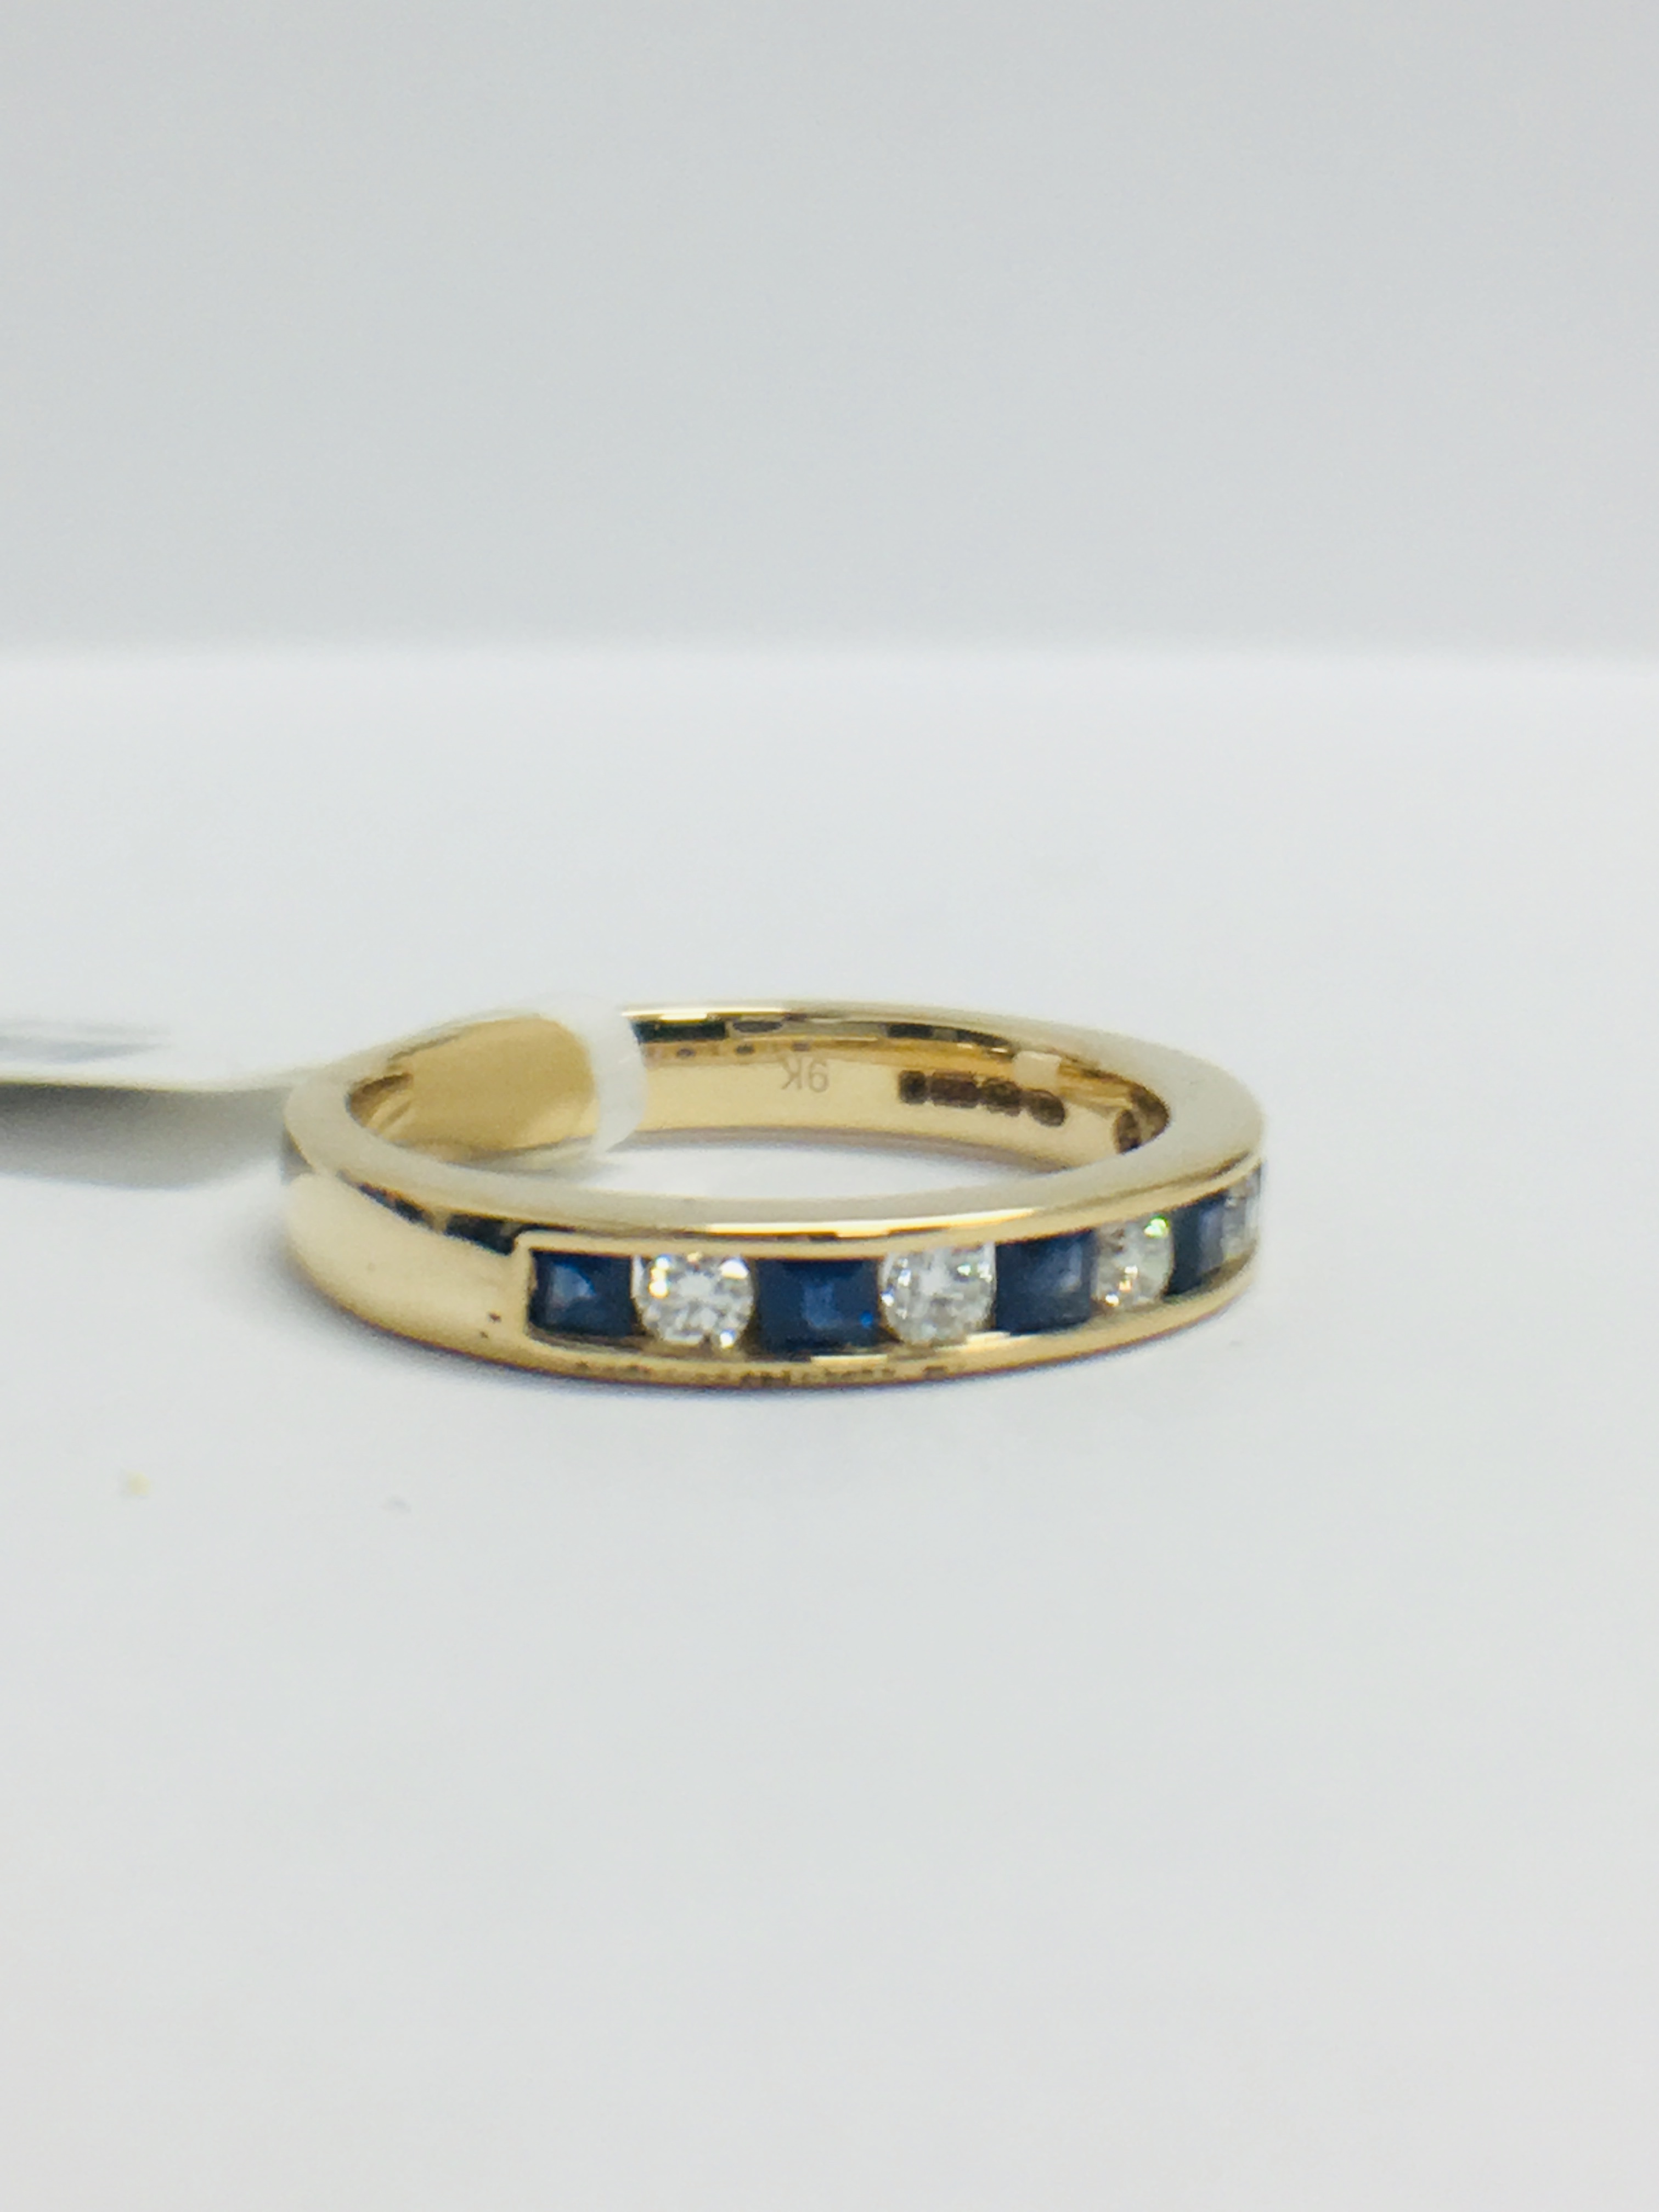 9Ct Yellow Gold Sapphire Diamond Channel Set Eternity Ring, - Image 8 of 9